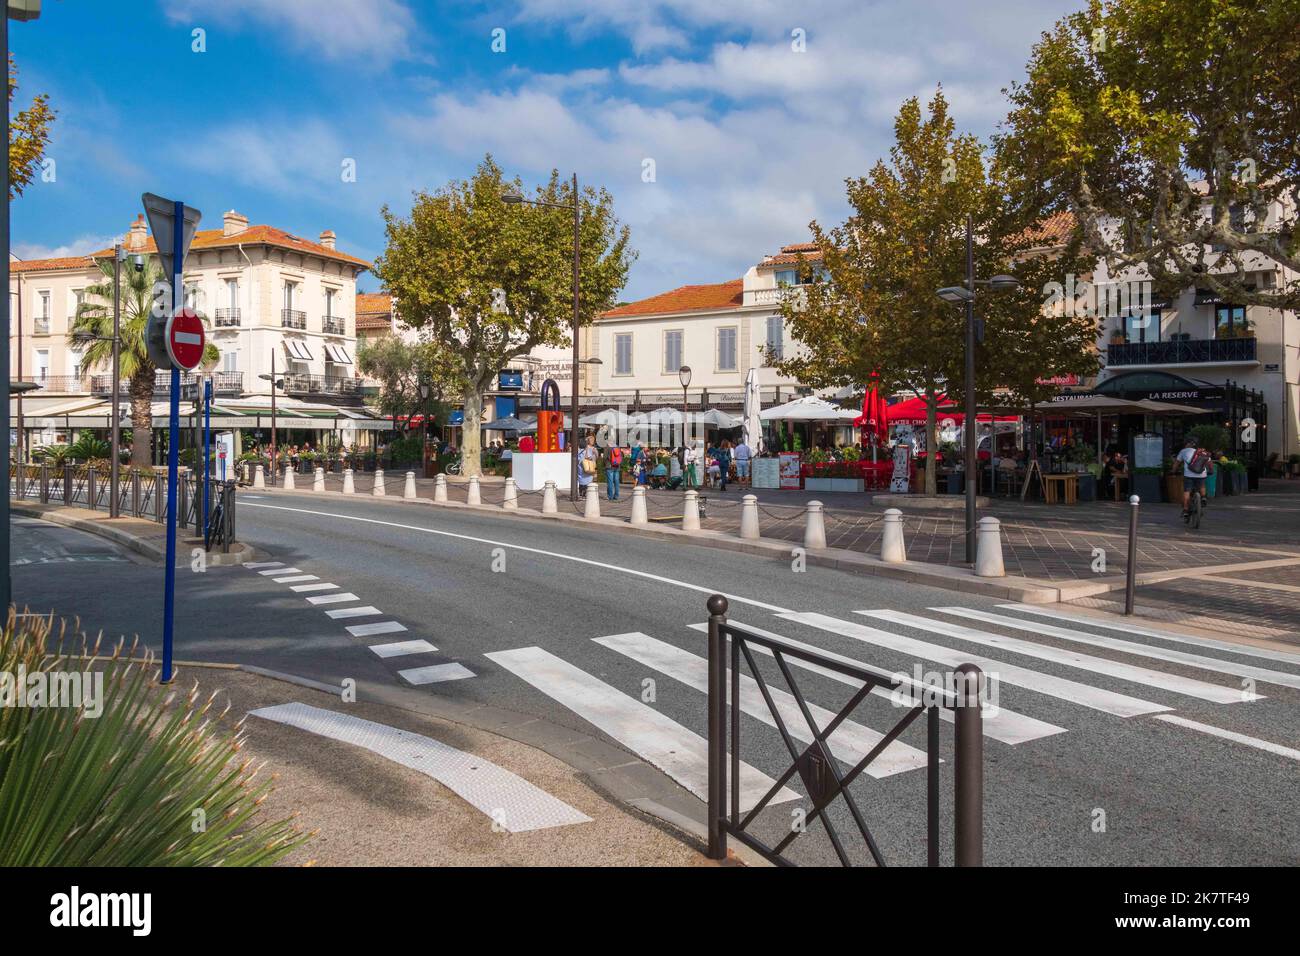 Avenue Charles de Gaulle in Sainte-Maxime, in the Var department of the Provence-Alpes-Côte d'Azur region in Southeastern France. Stock Photo